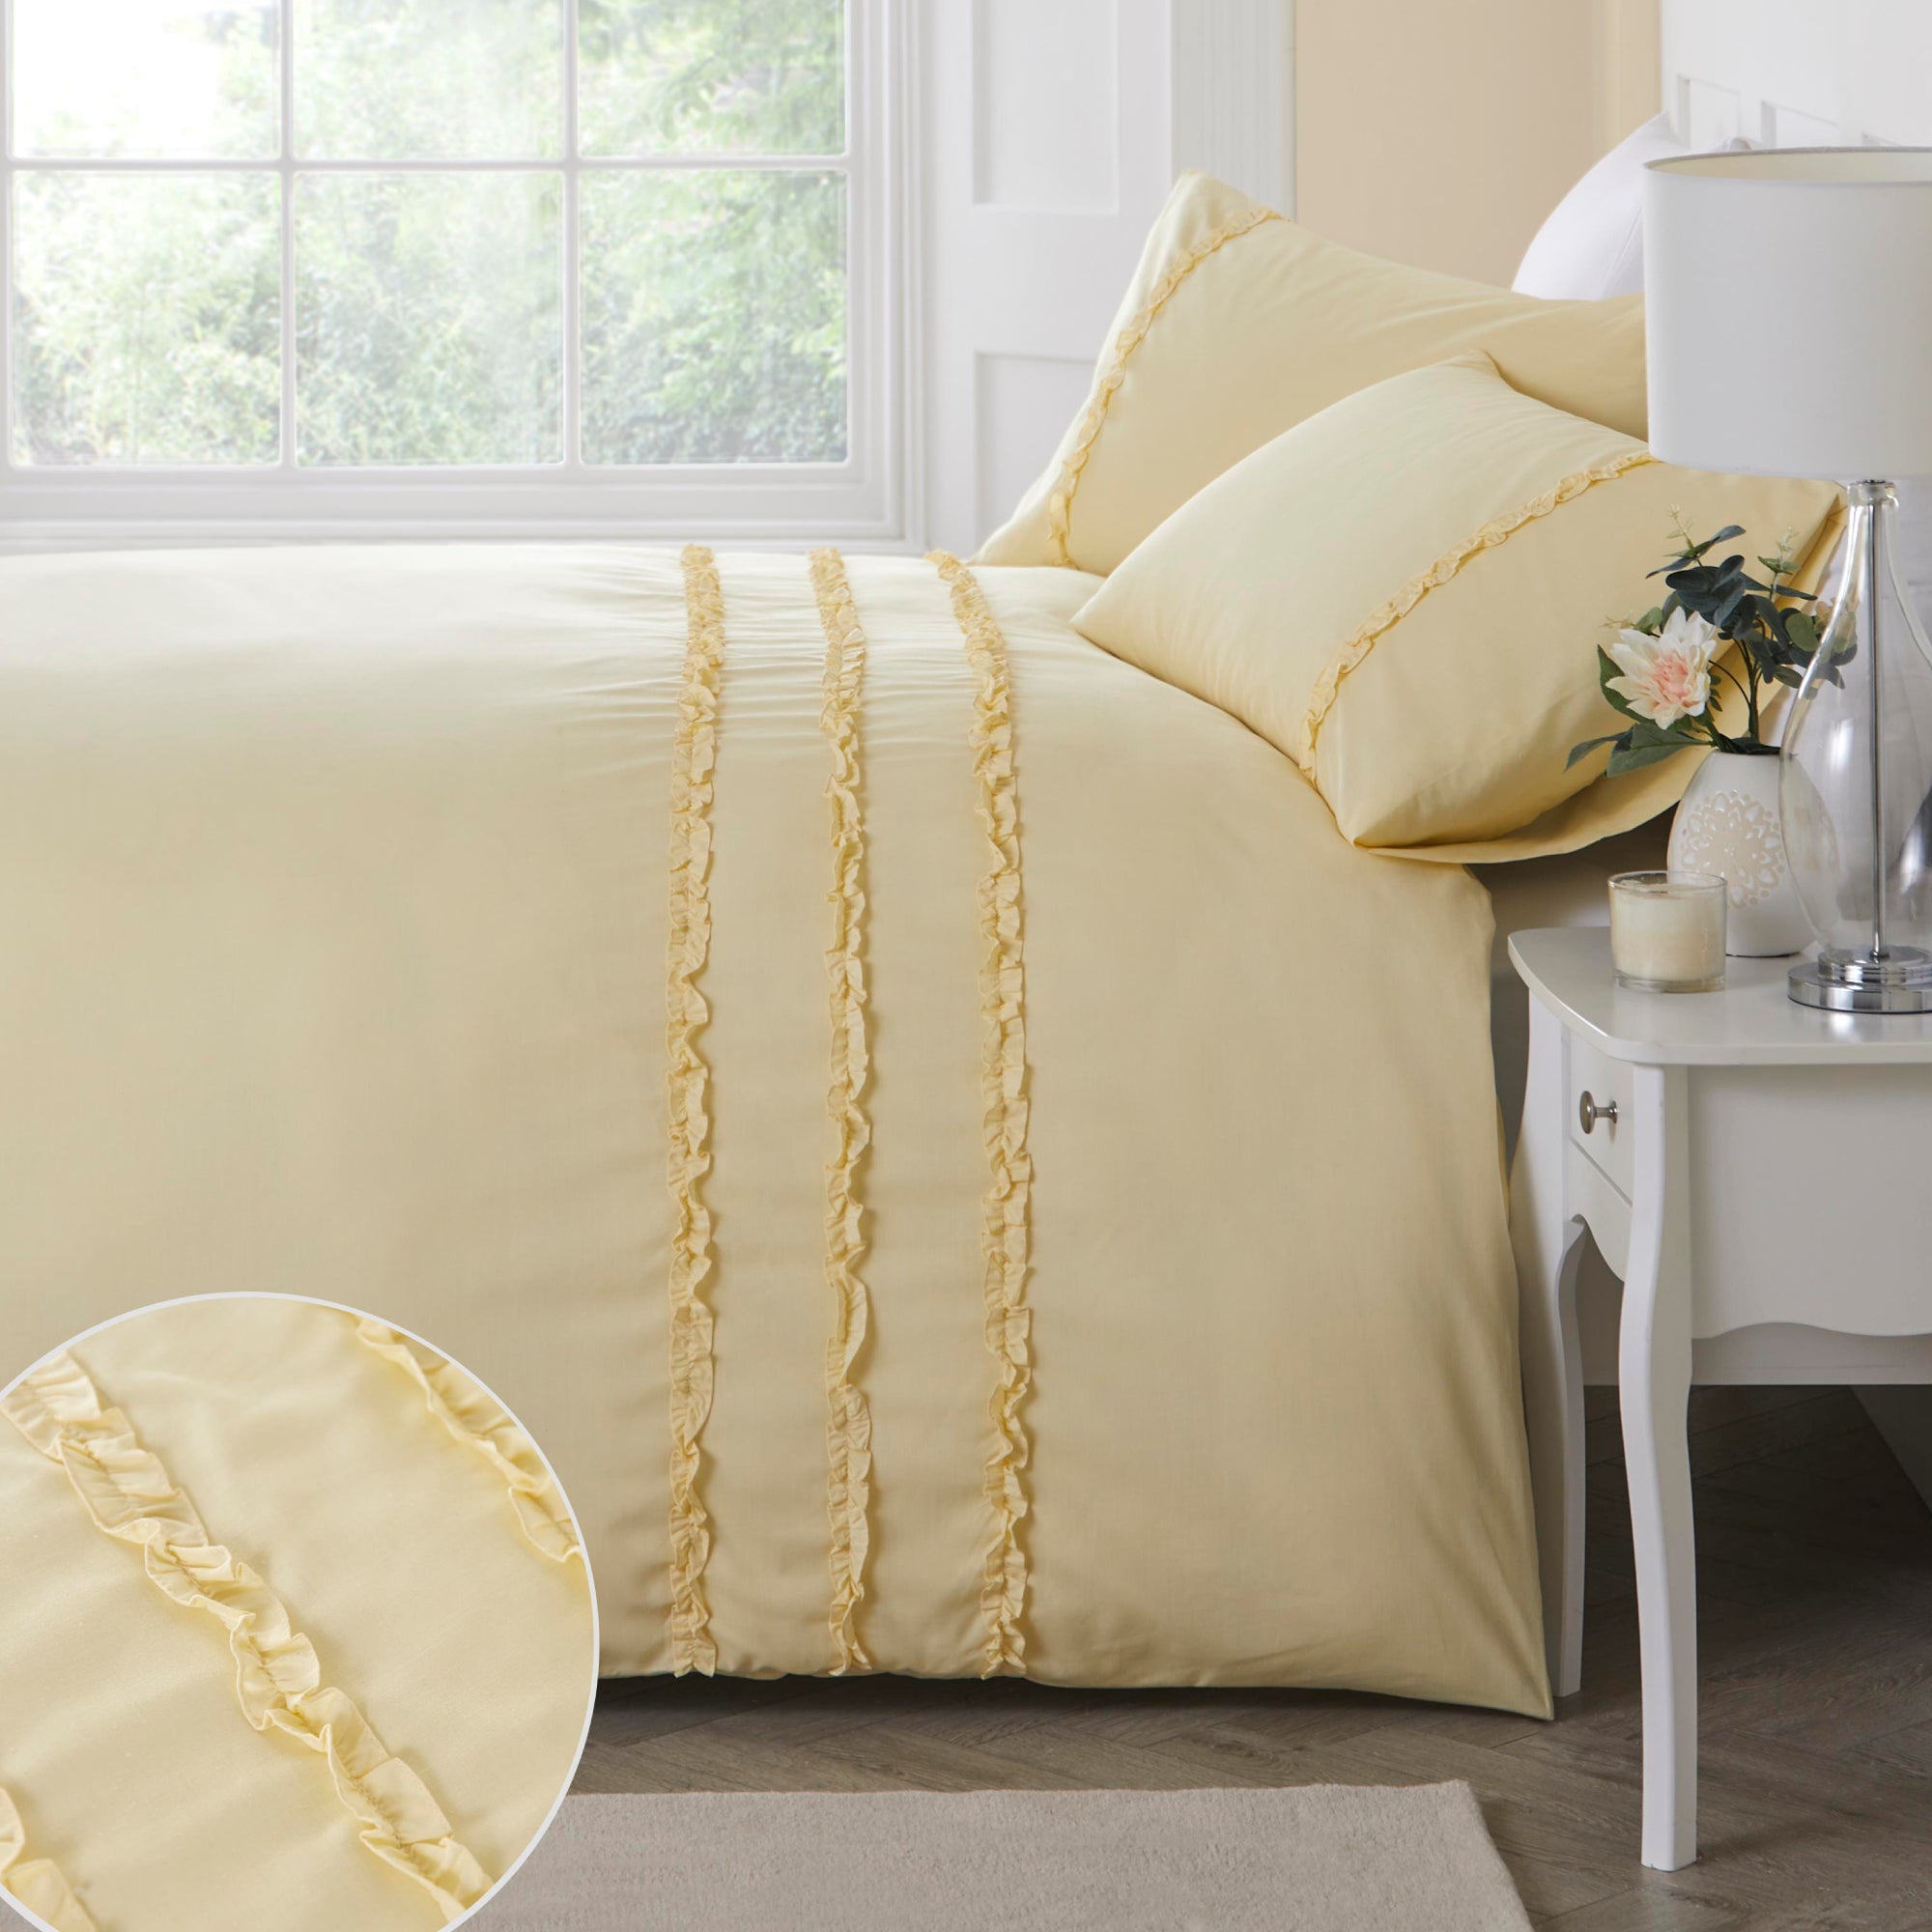 Duvet Cover Set Felicia Frill by Serene in Yellow